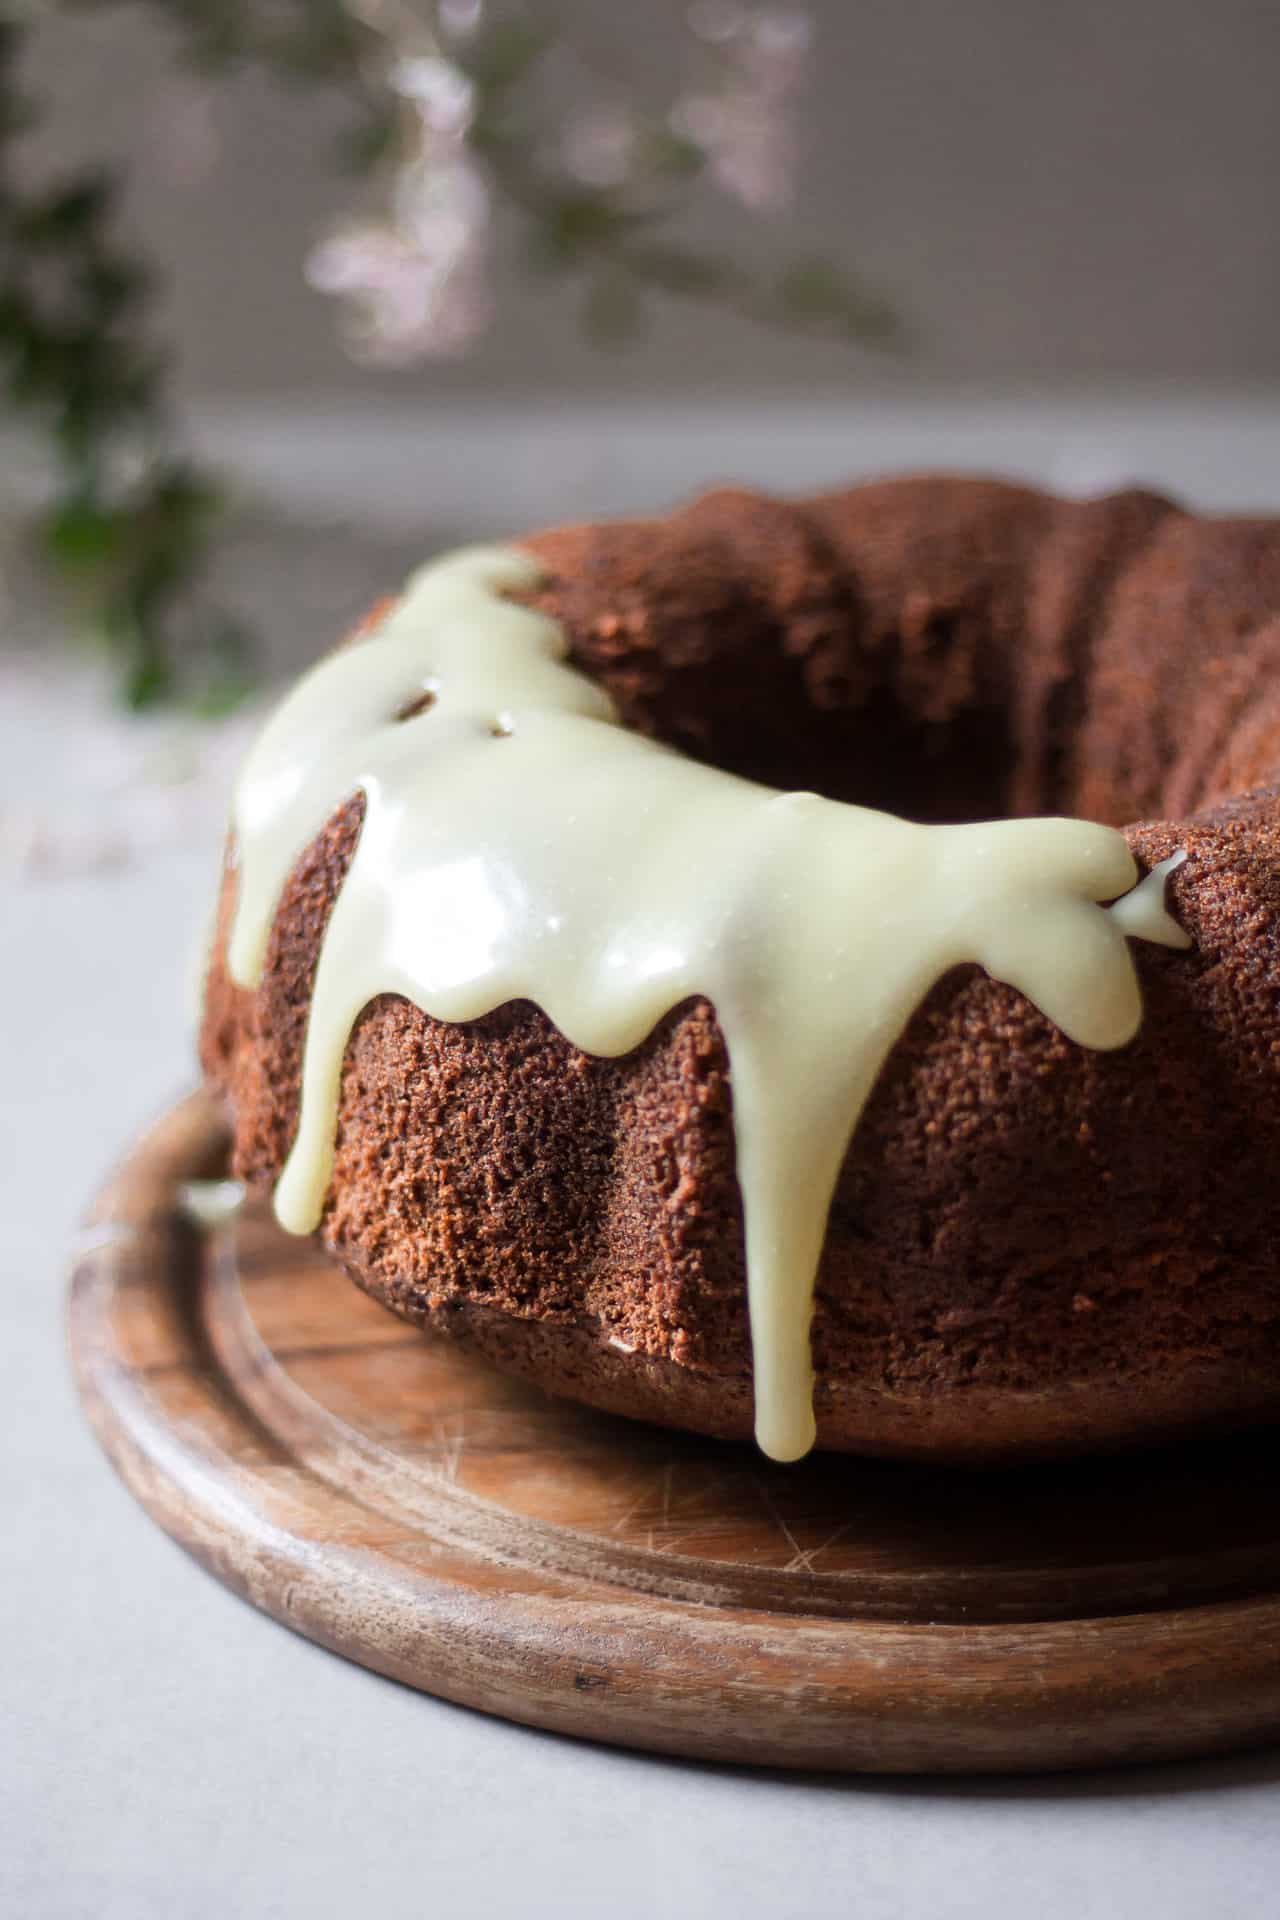 Low FODMAP Gluten-Free Marble Bundt Cake. This cake is flavorful, moist and perfectly sweetened. Every bite melts in the mouth.